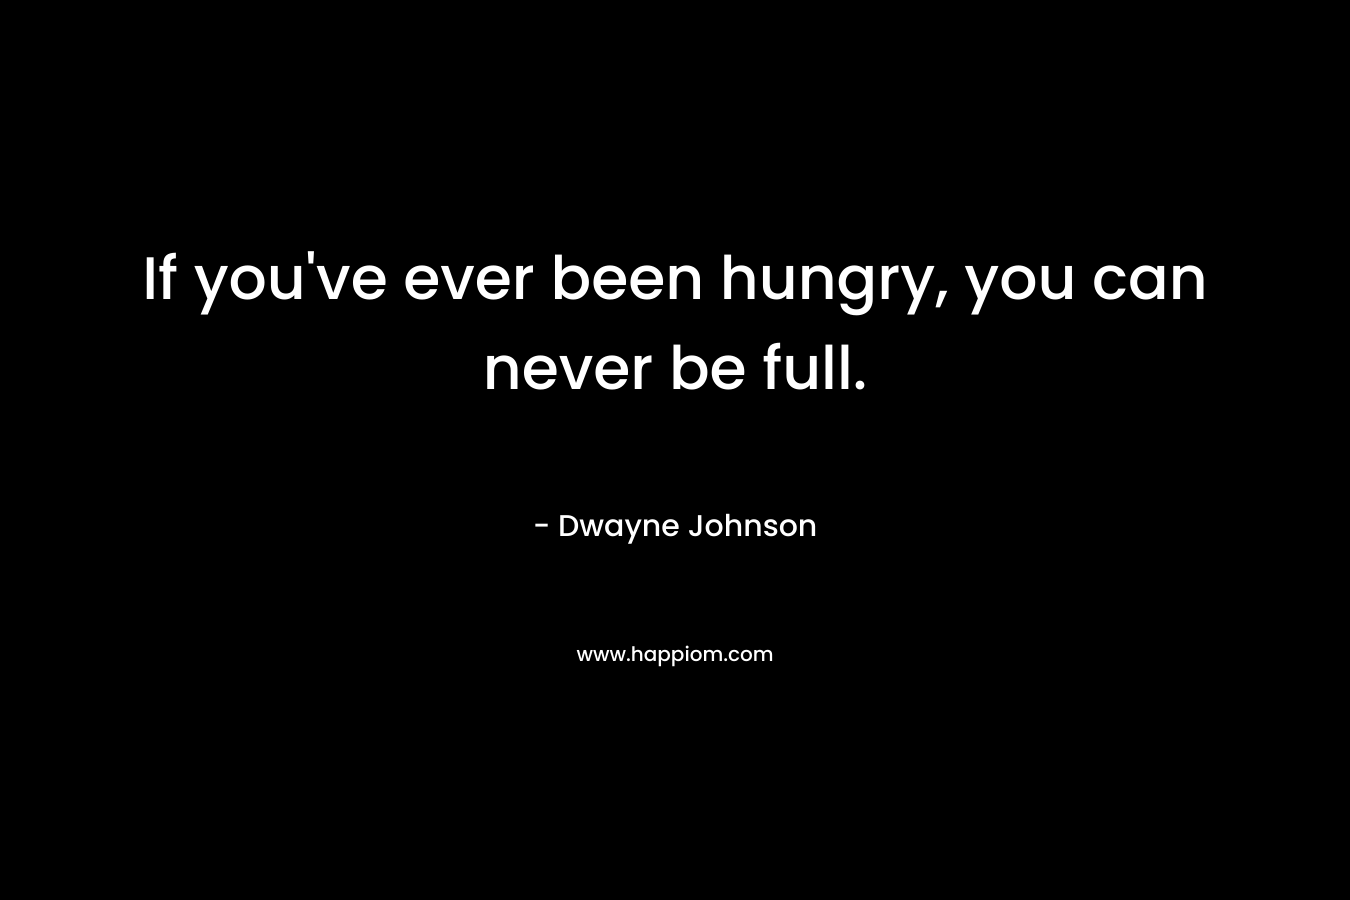 If you've ever been hungry, you can never be full.